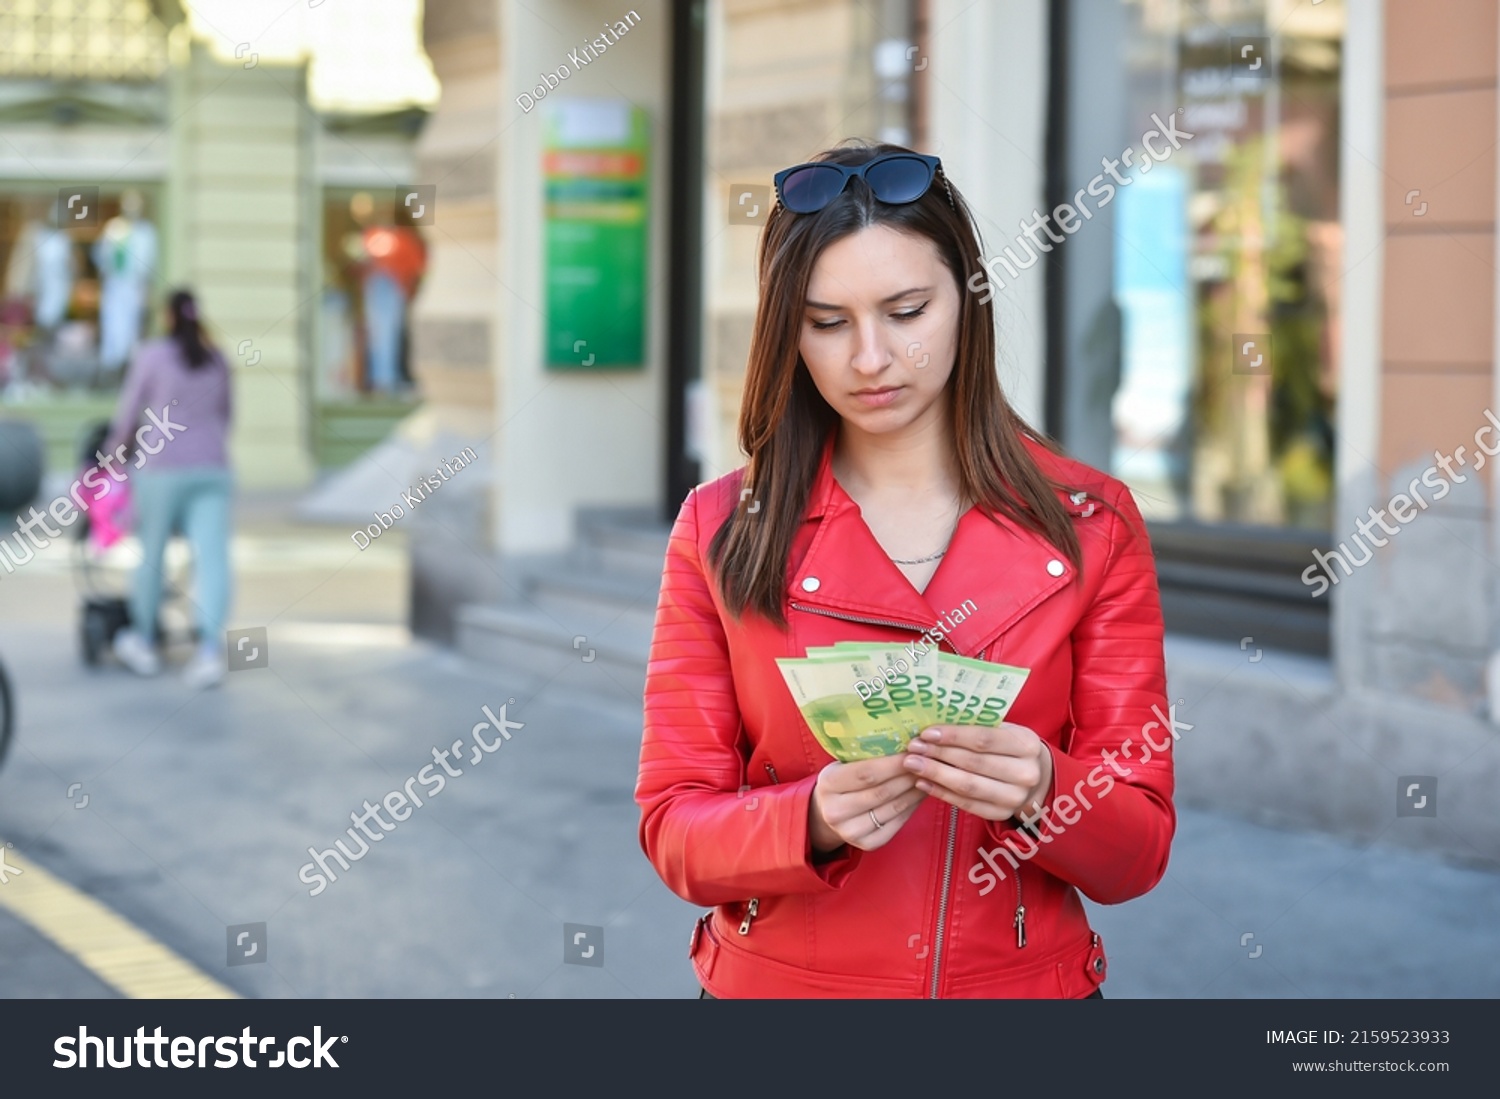 Young Woman Counting Hundred Euro Banknotes Stock Photo 2159523933